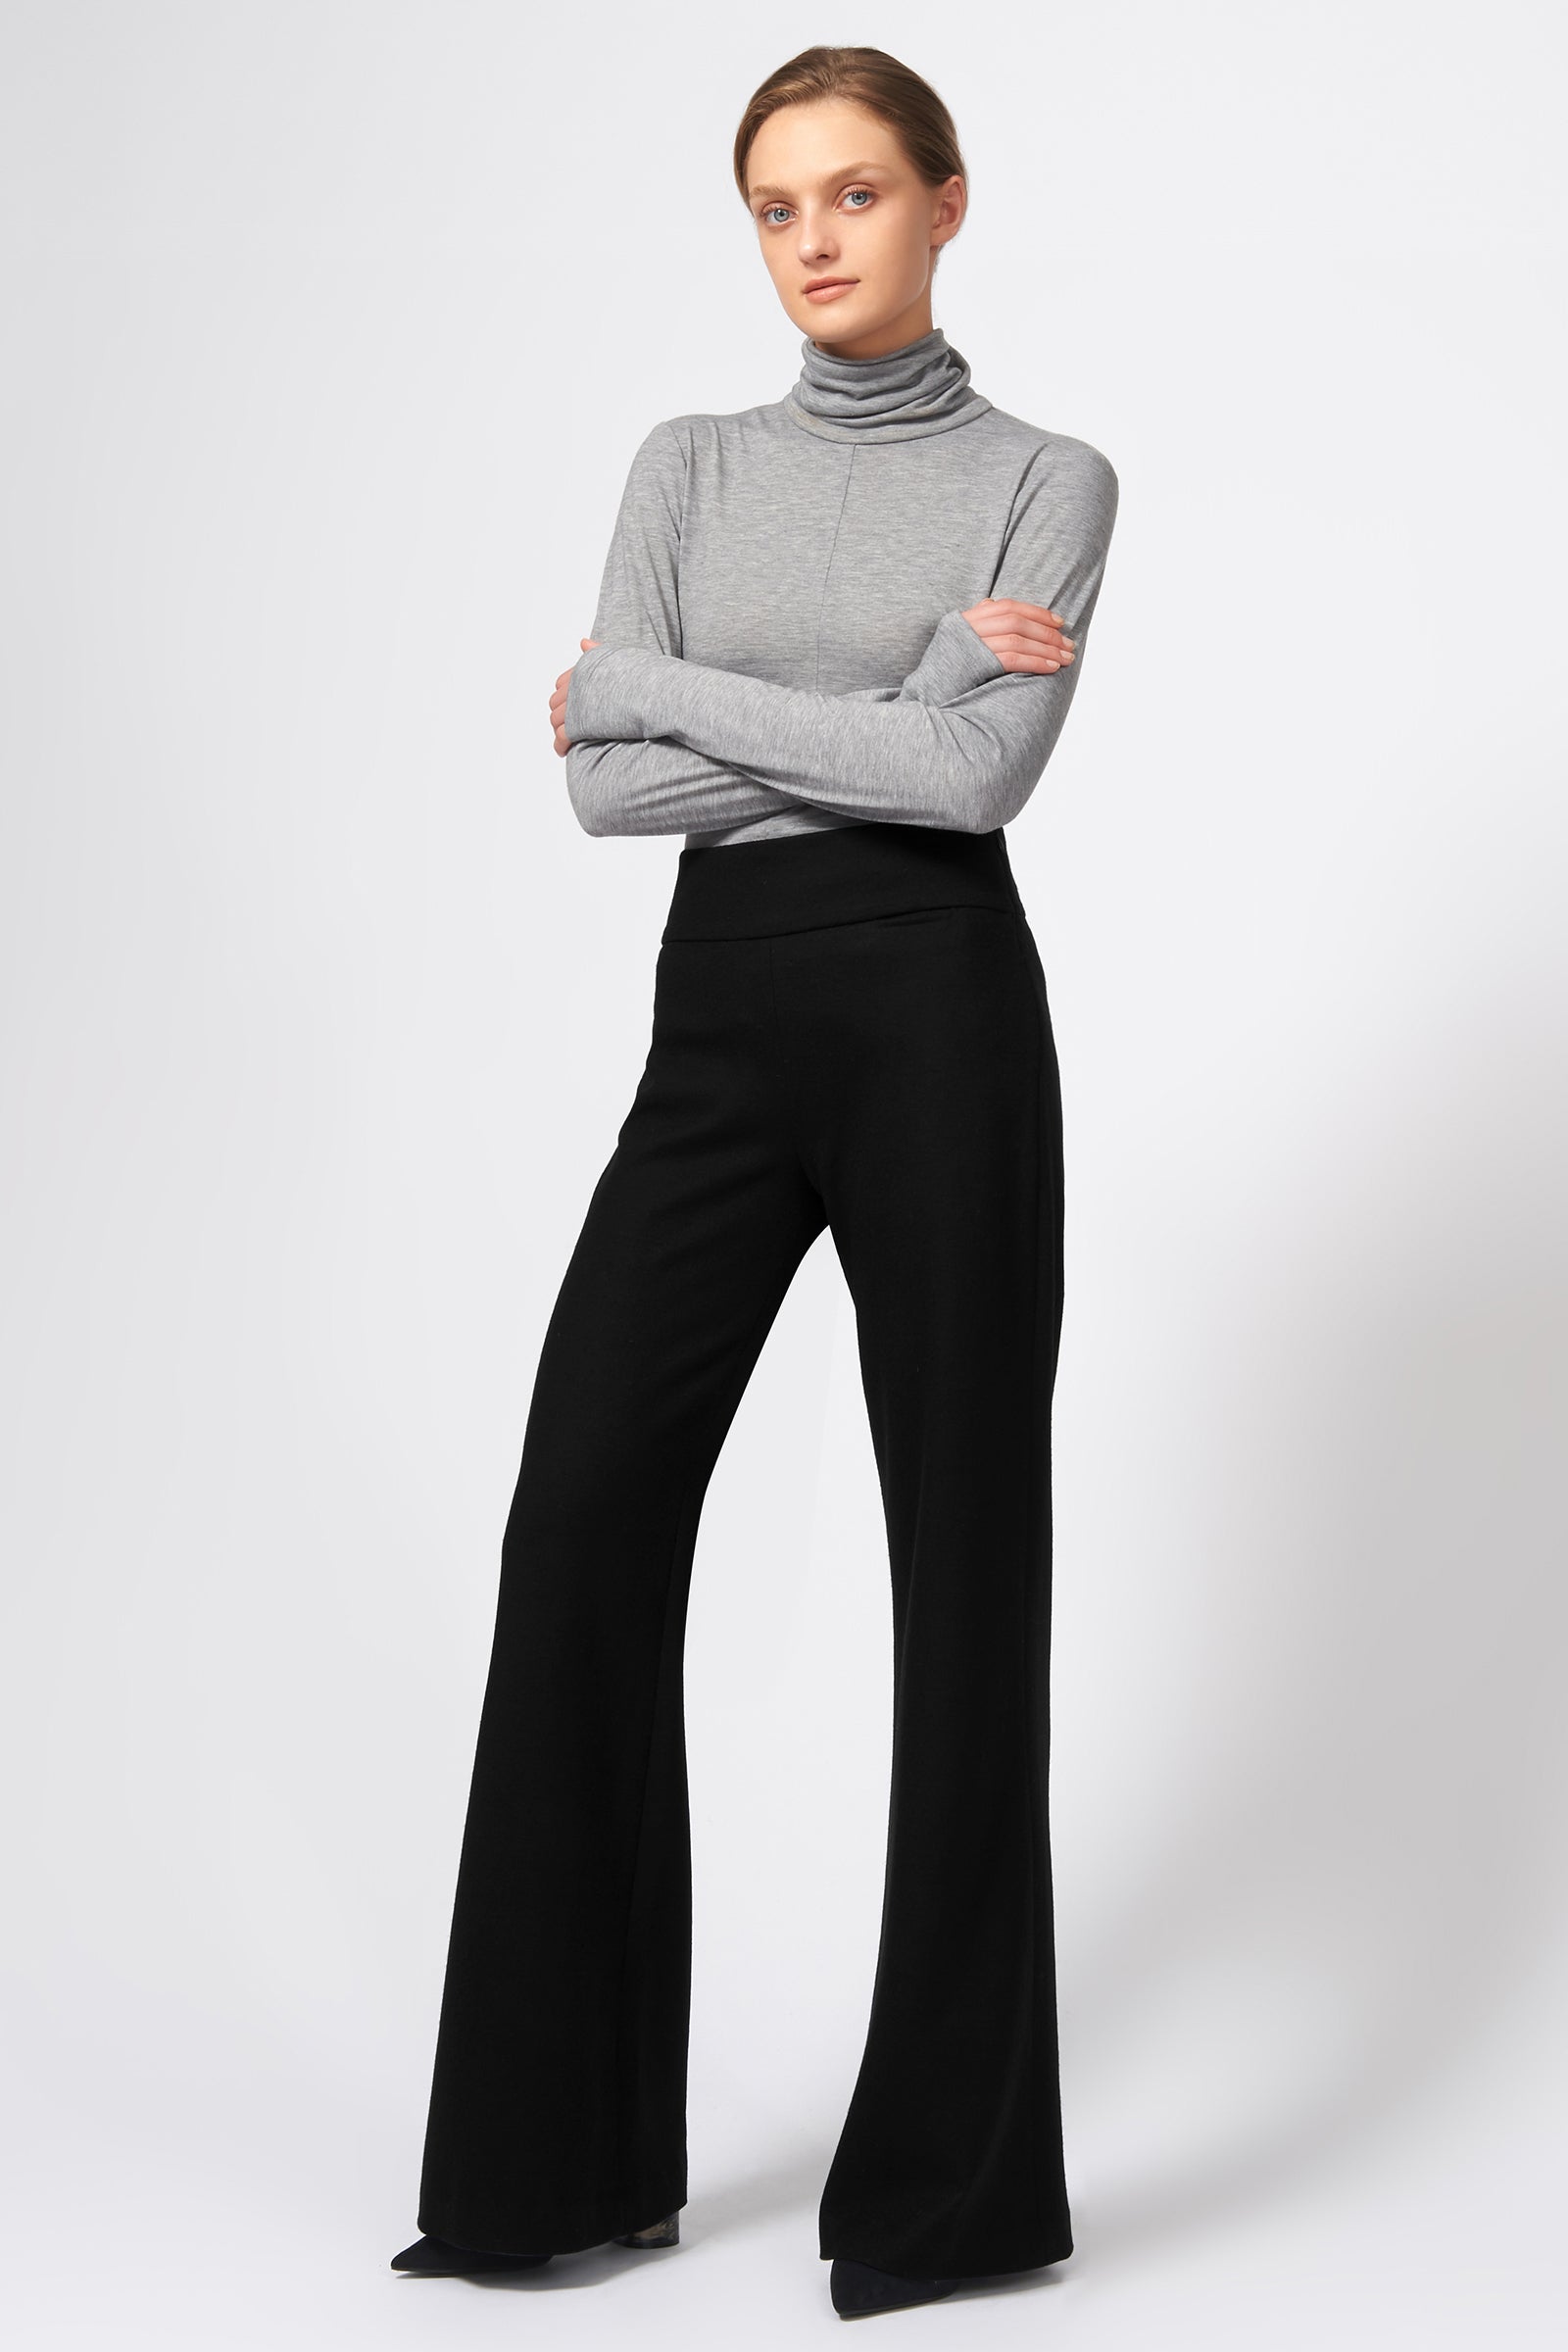 Felted Jersey Wide Leg Pant in Black Made in 100% Japanese Wool – KAL RIEMAN